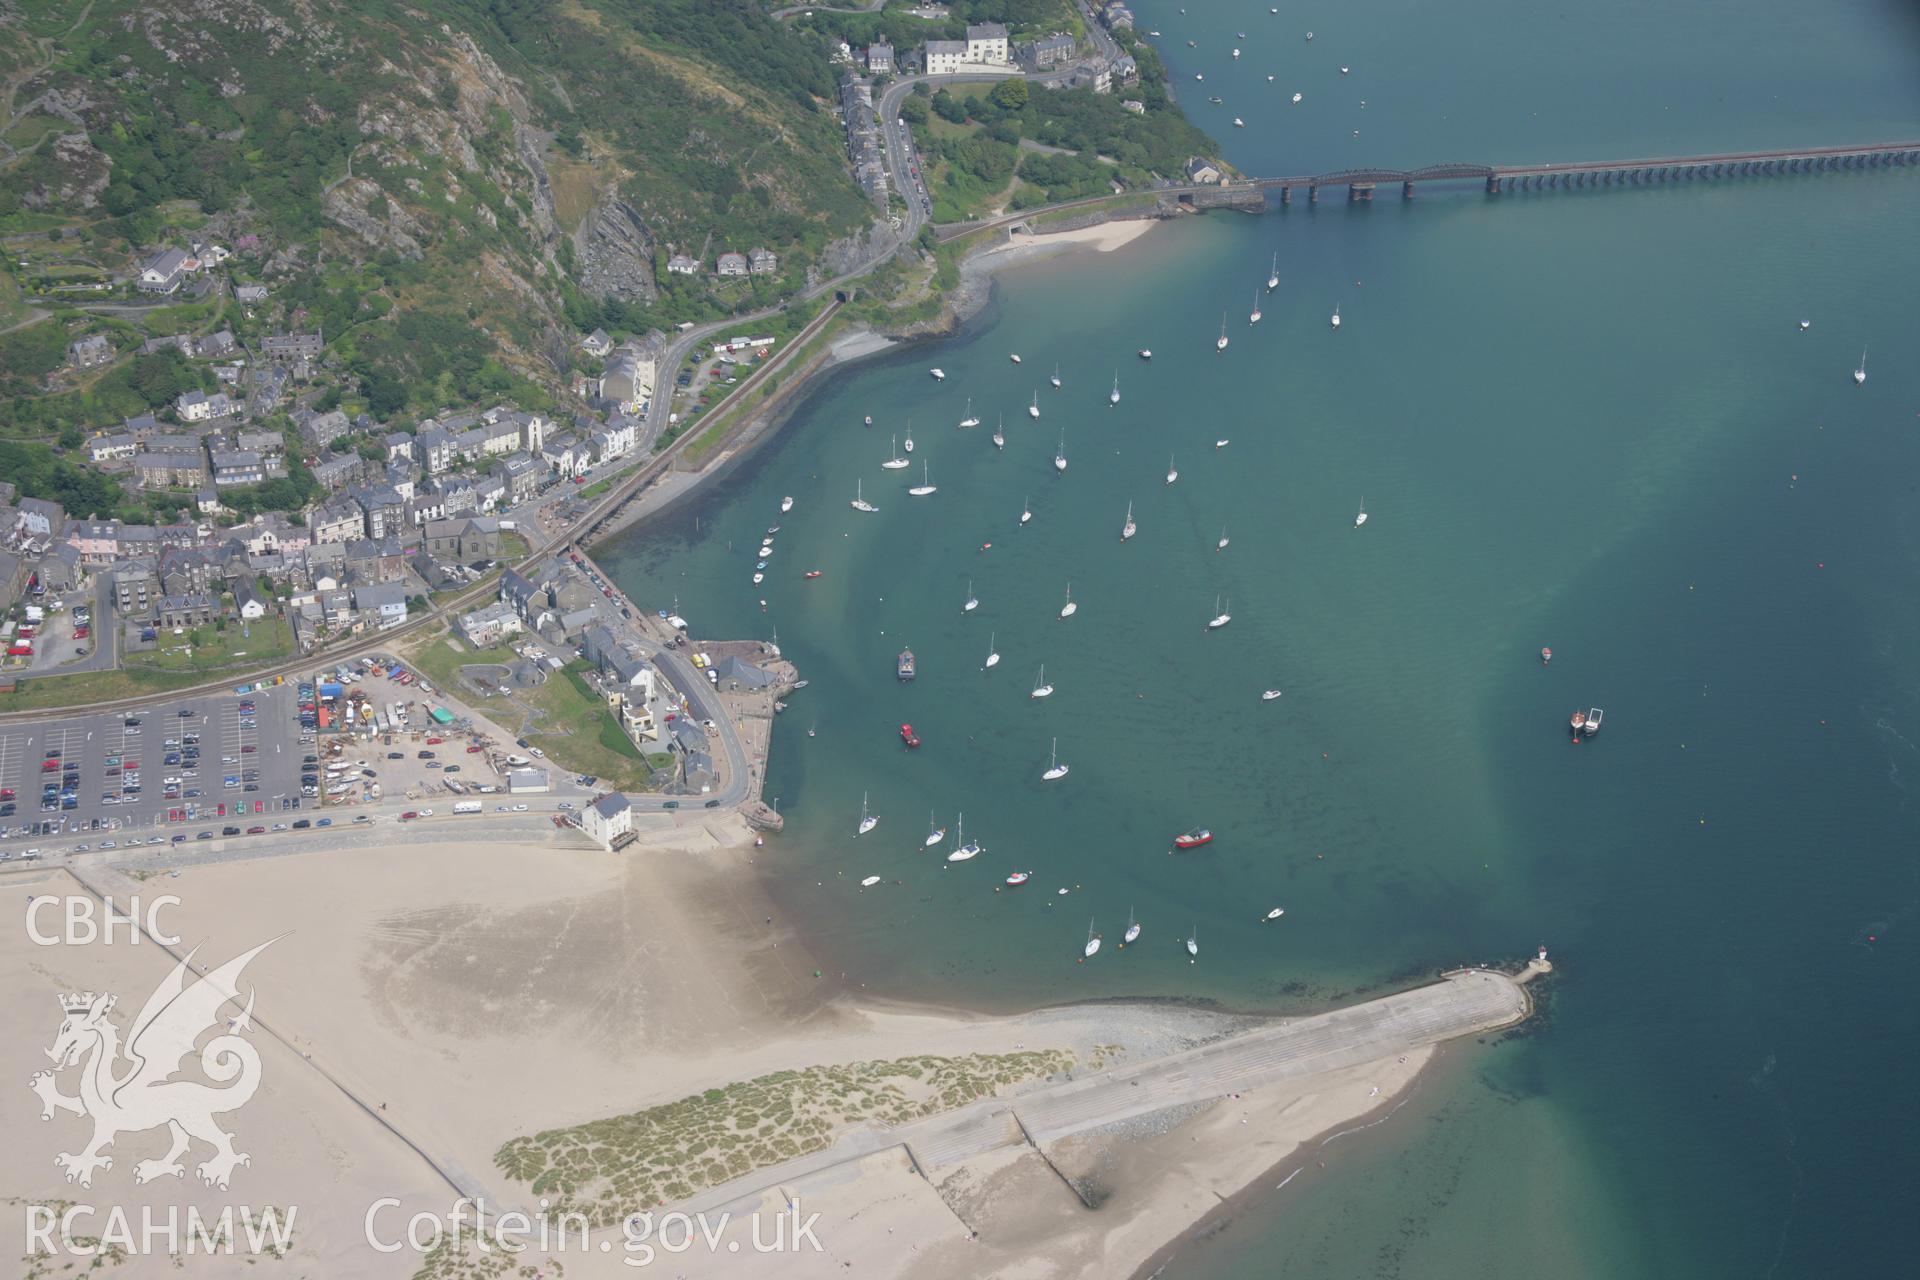 RCAHMW colour oblique aerial photograph of Barmouth. Taken on 04 July 2006 by Toby Driver